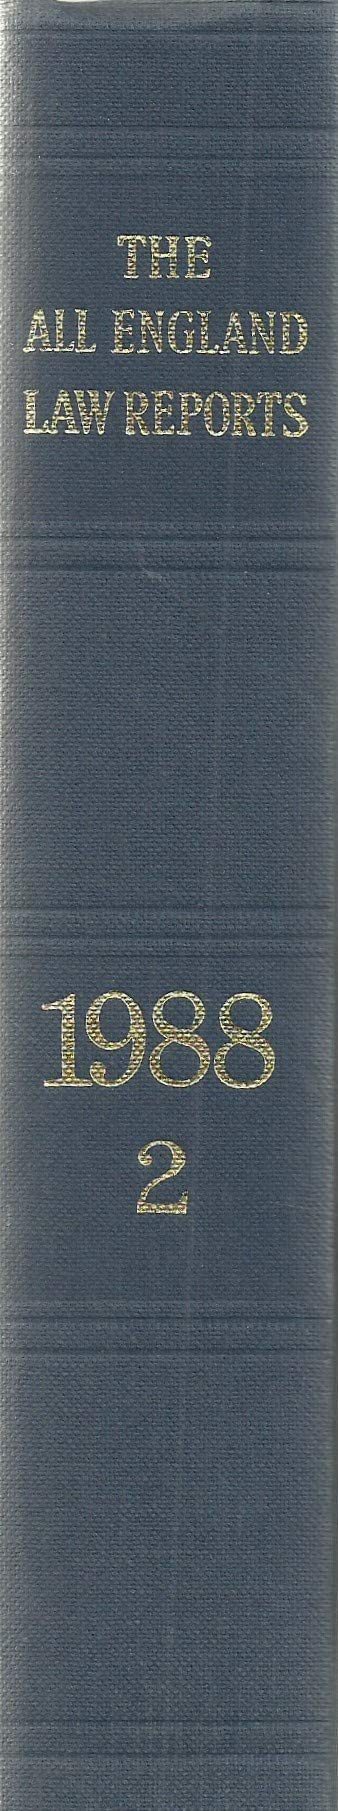 The All England Law Reports 1988 Volume 2